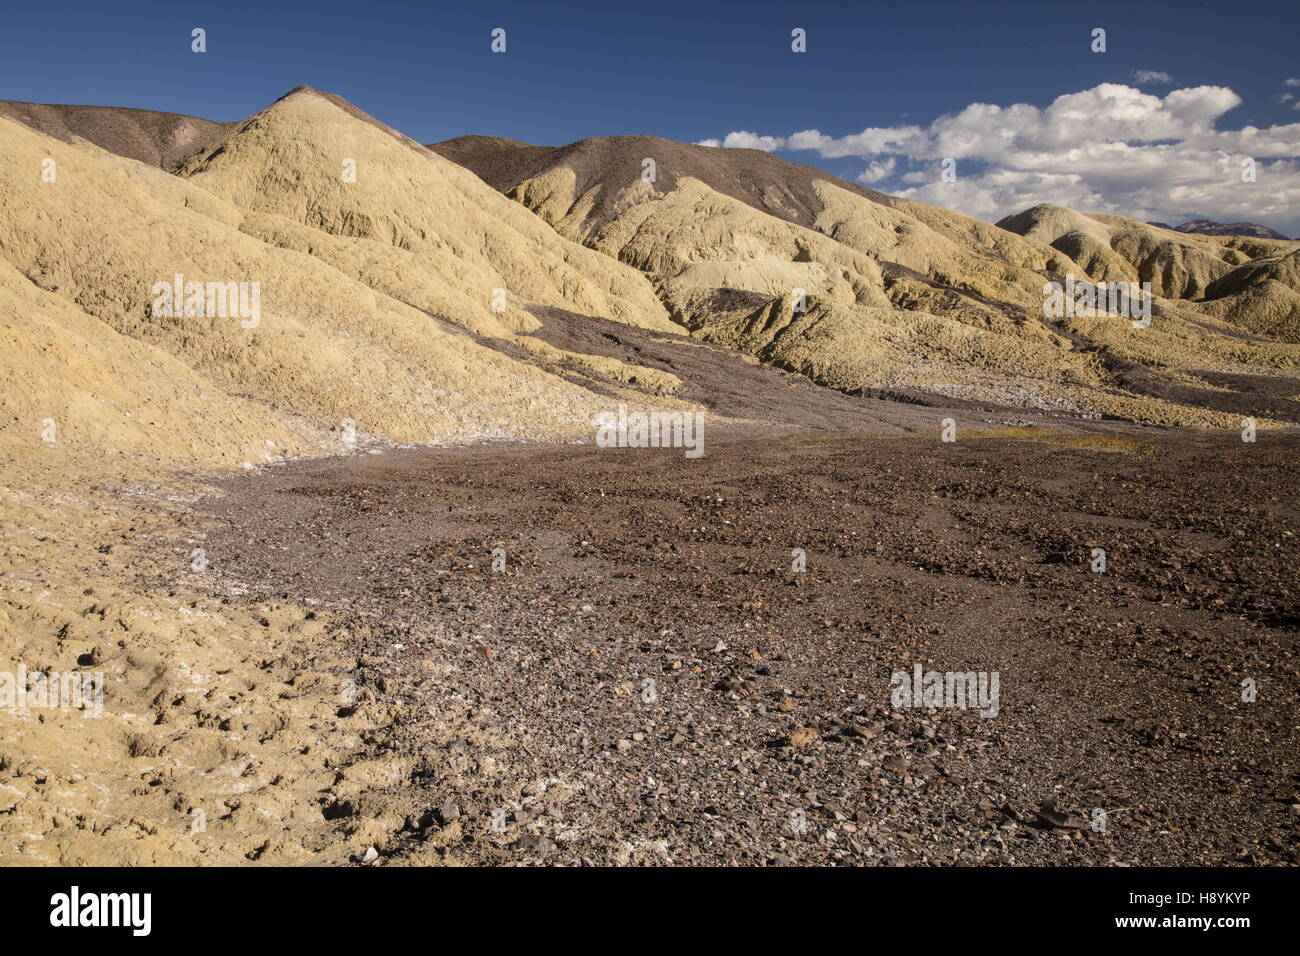 Dry desert and erosion in Death Valley National Park, California. Stock Photo